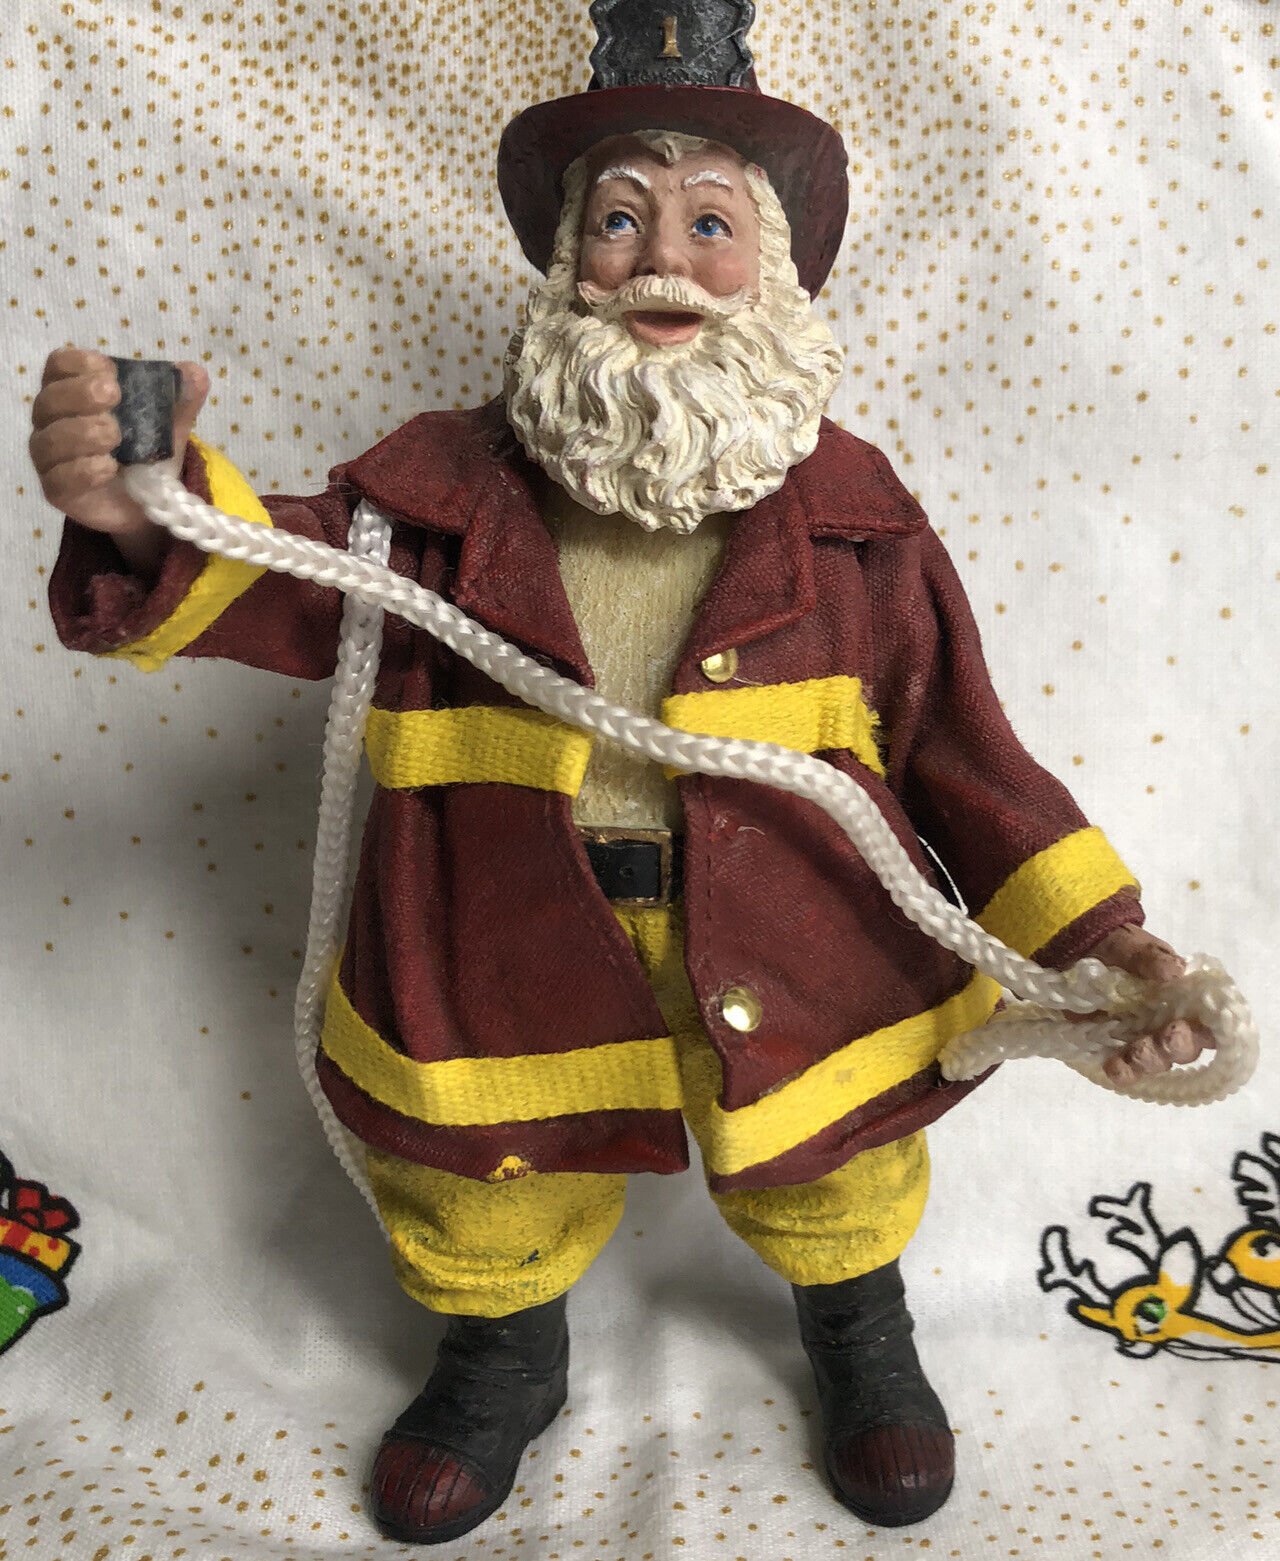 Santa Claus KSA Inc. Firefighters Ornament Note Damage In Pictures